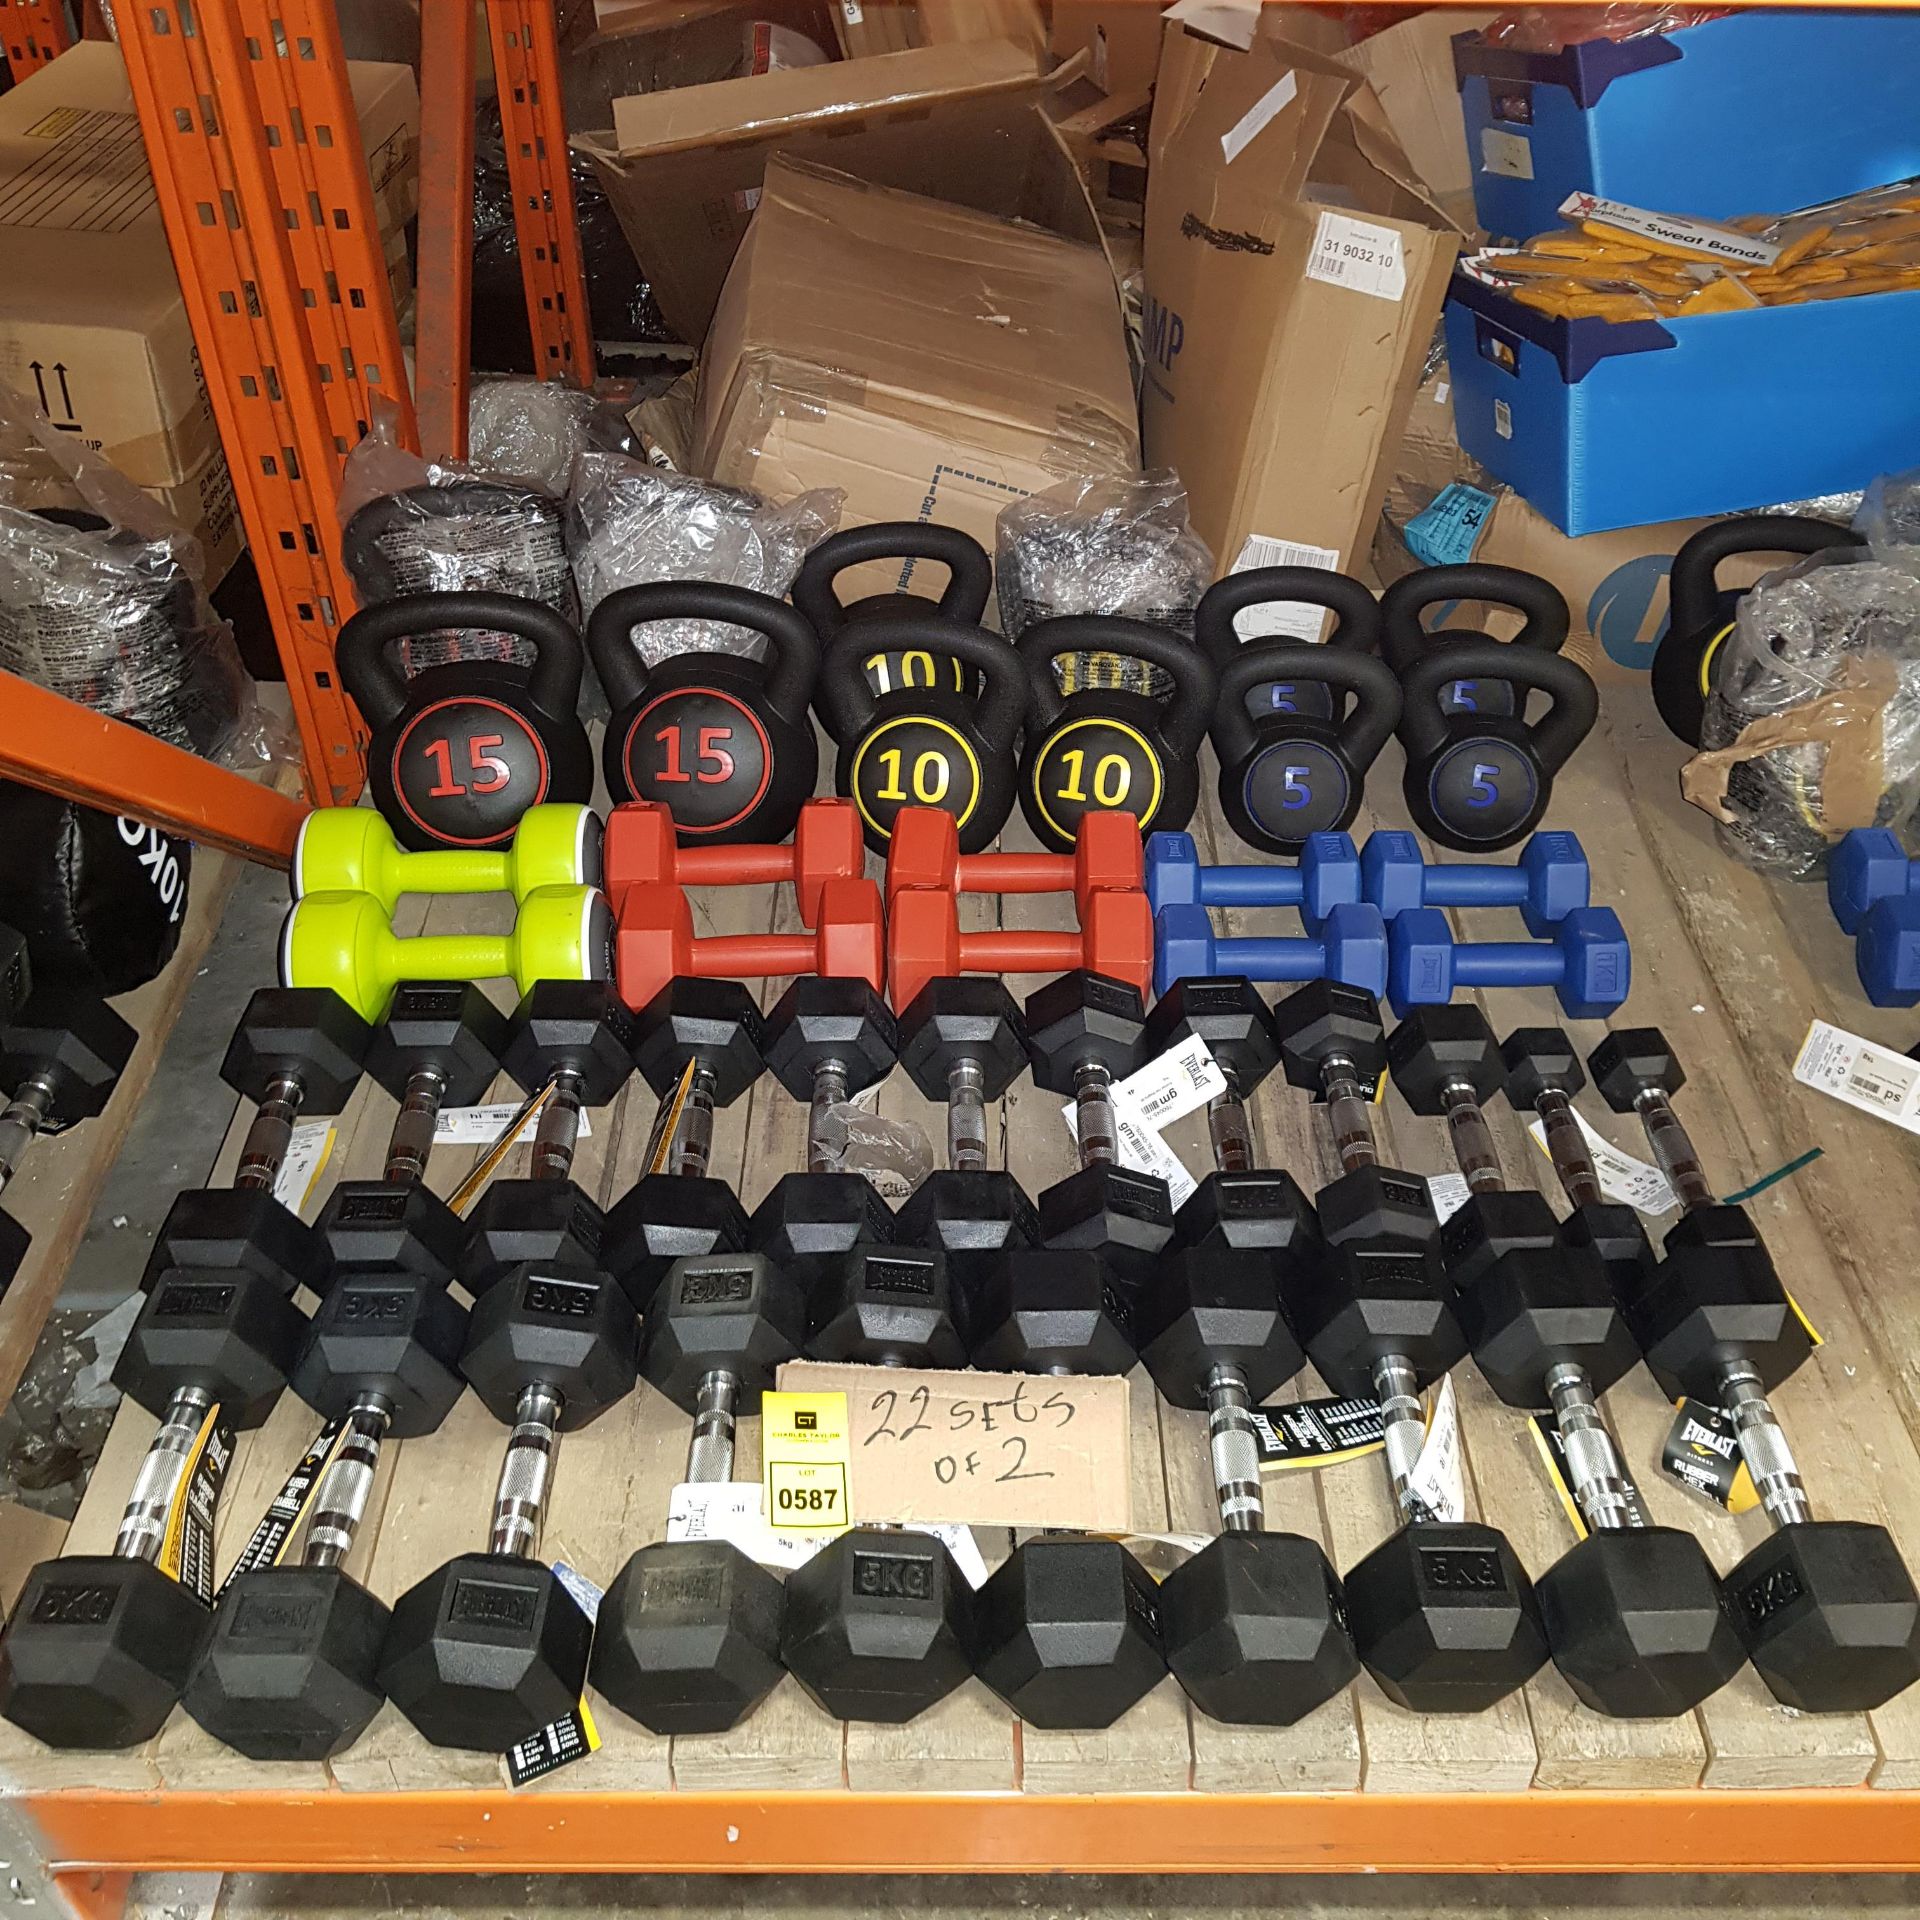 44 PIECE MIXED GYM LOT CONTAINING EVERLAST RUBBER HEX SETS OF 2 DUMBELLS - 3 KG / 5 KG / KETTLE